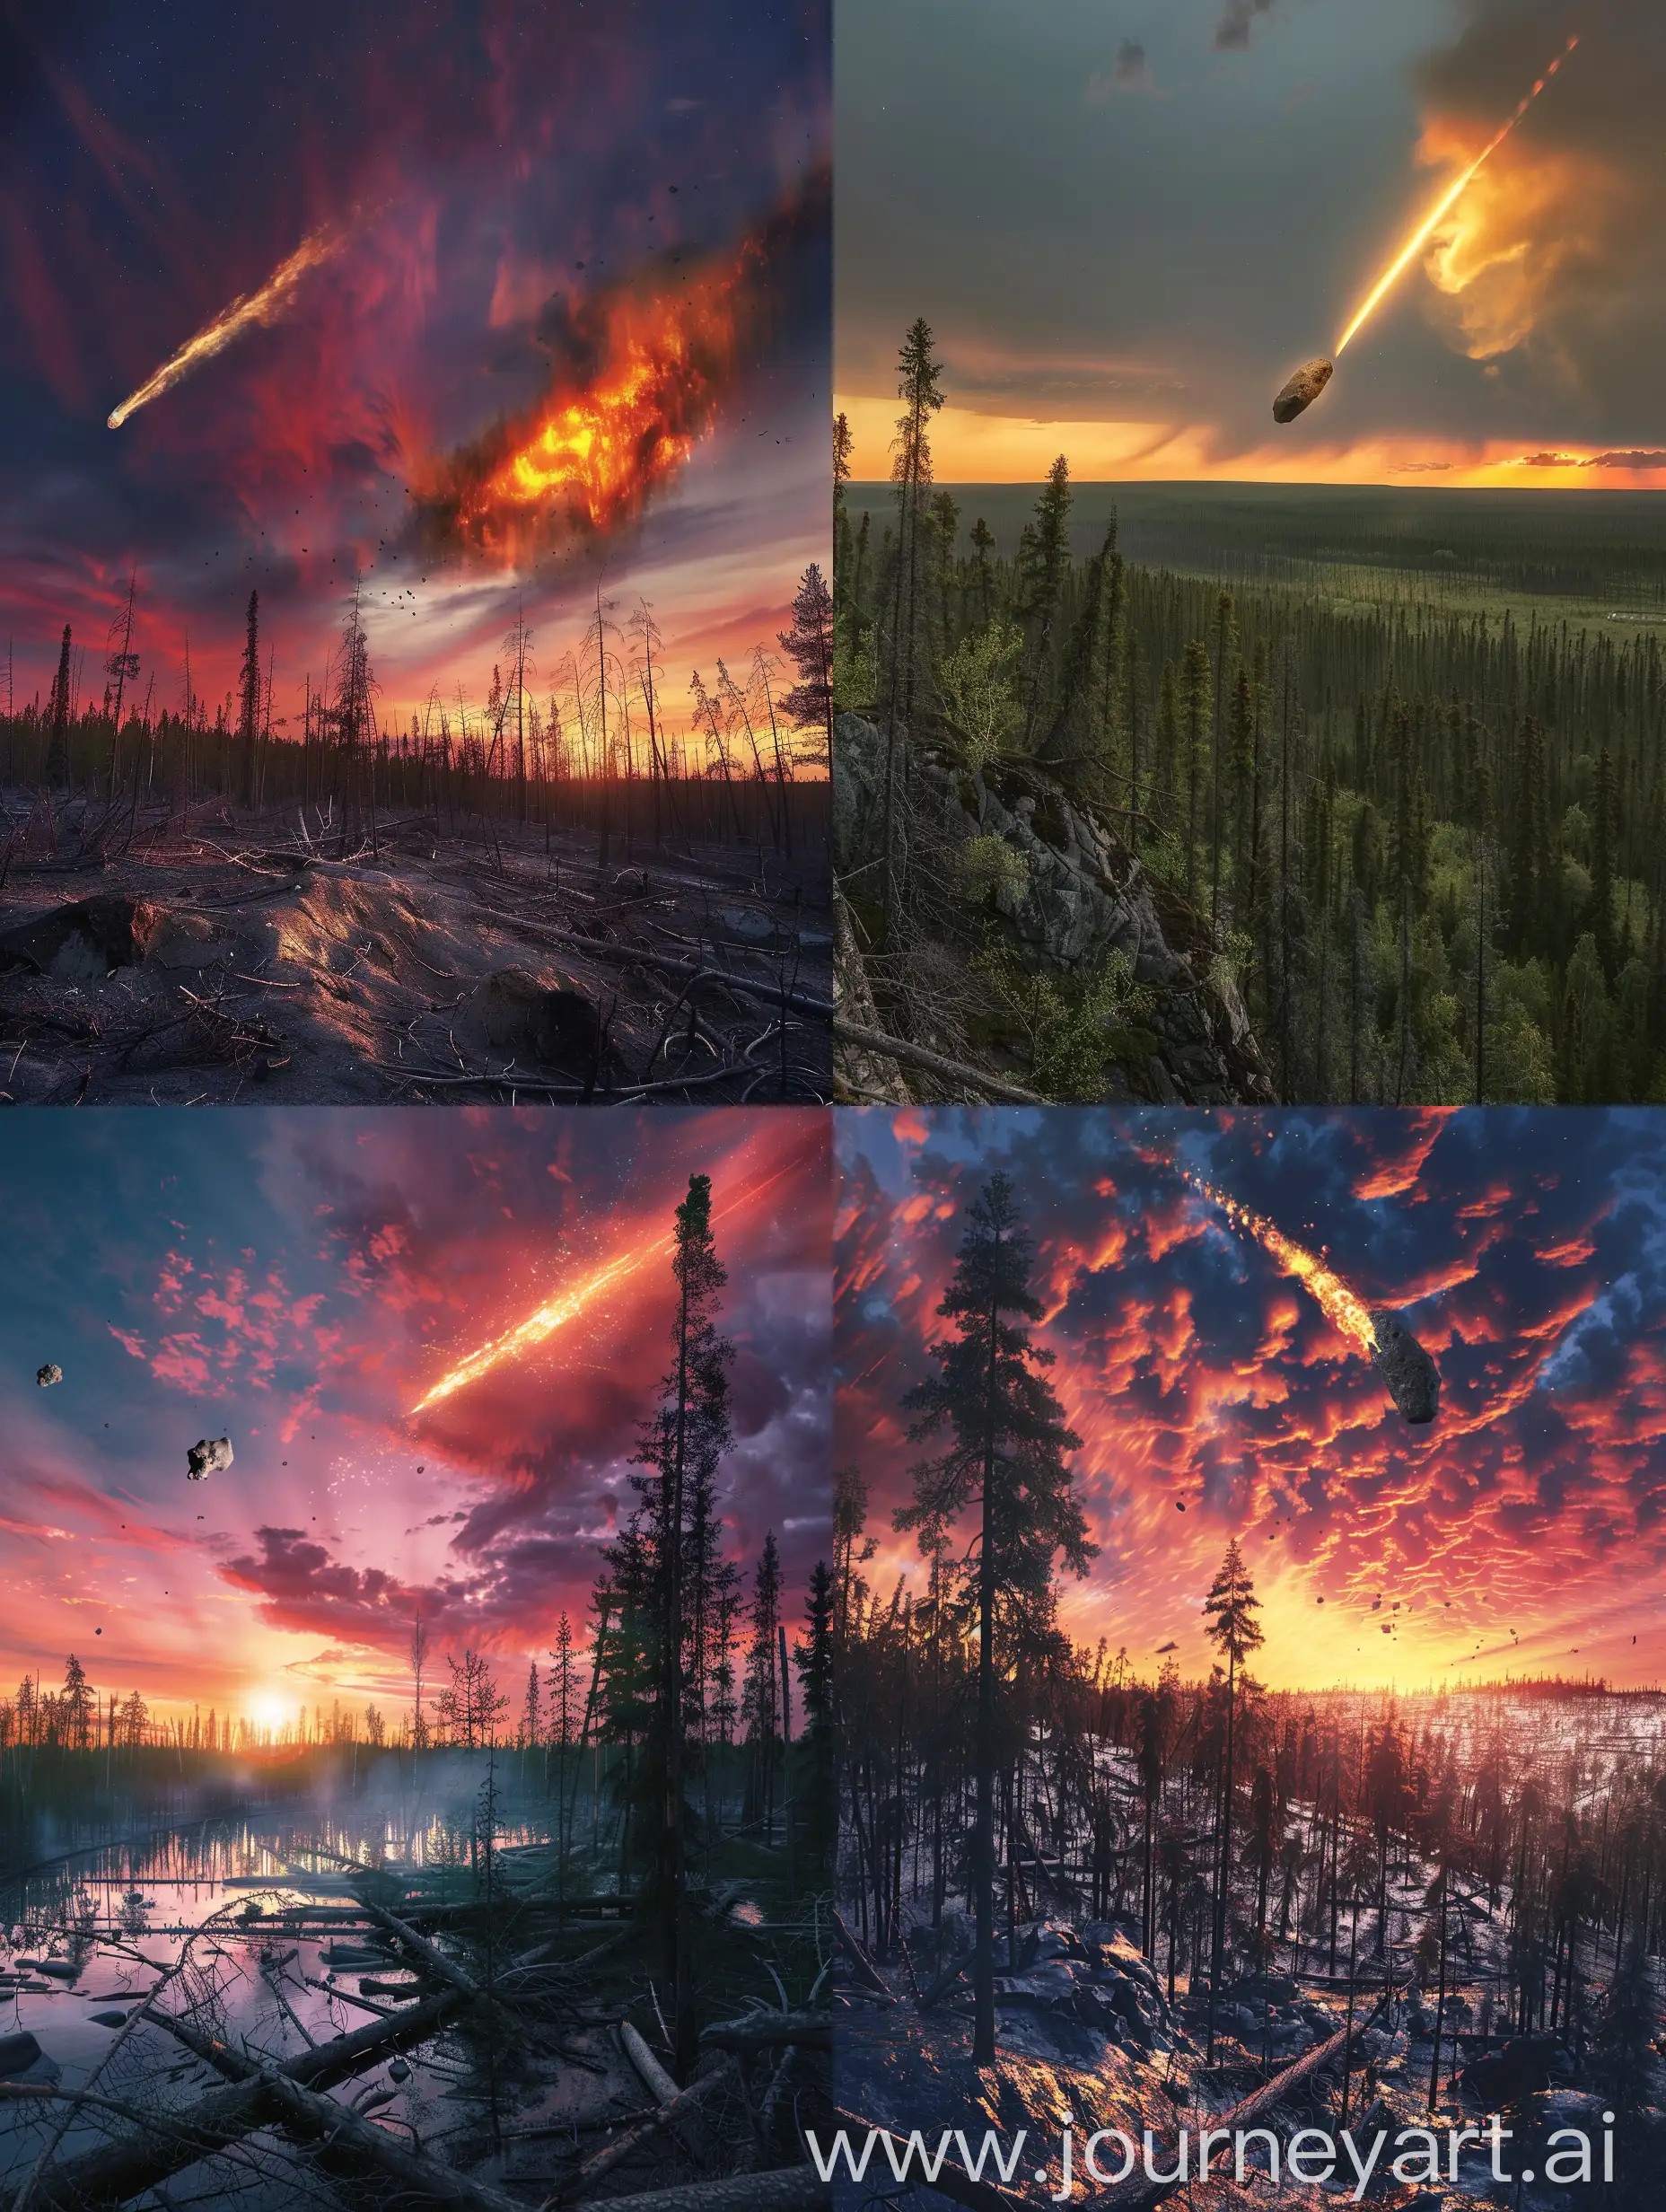 Spectacle-of-Destruction-Siberian-Forest-Flattened-by-Asteroid-Impact